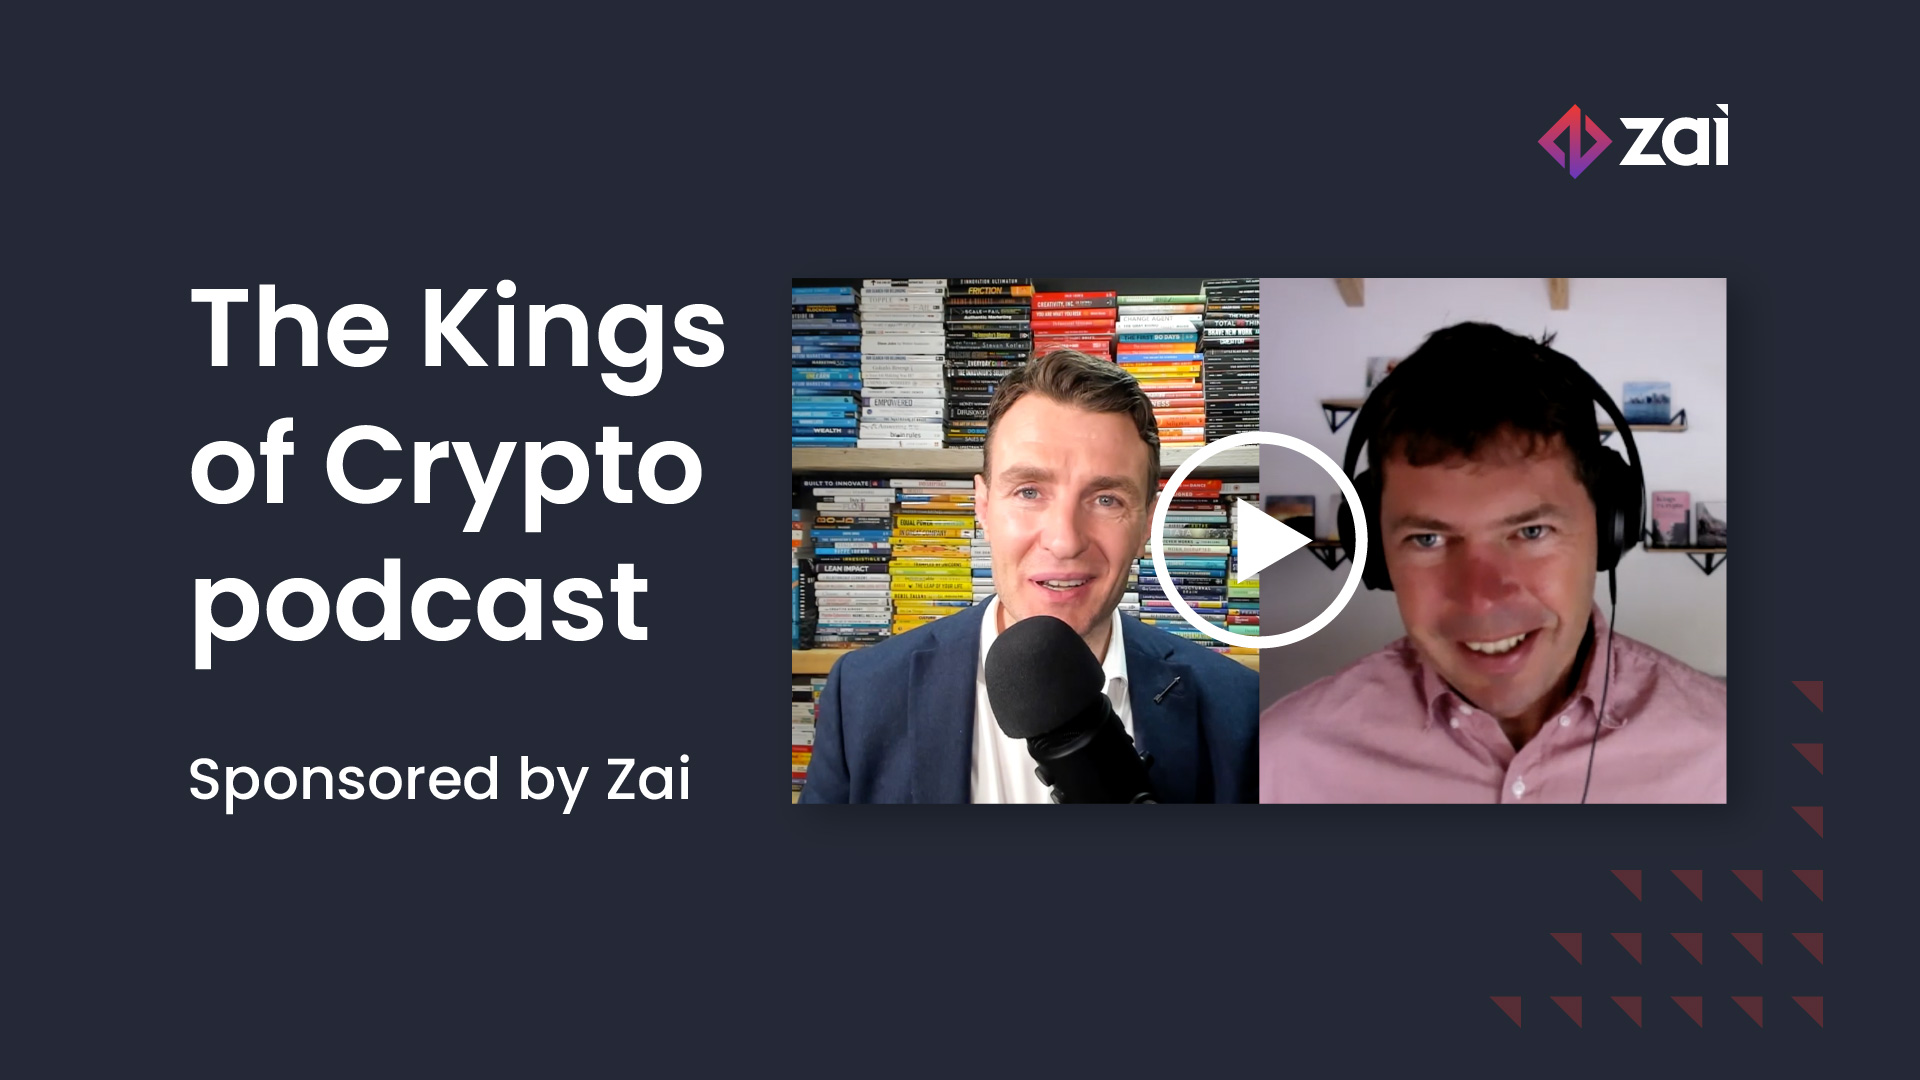 The Kings of Crypto podcast with Aidan McCullen of The Innovation Show